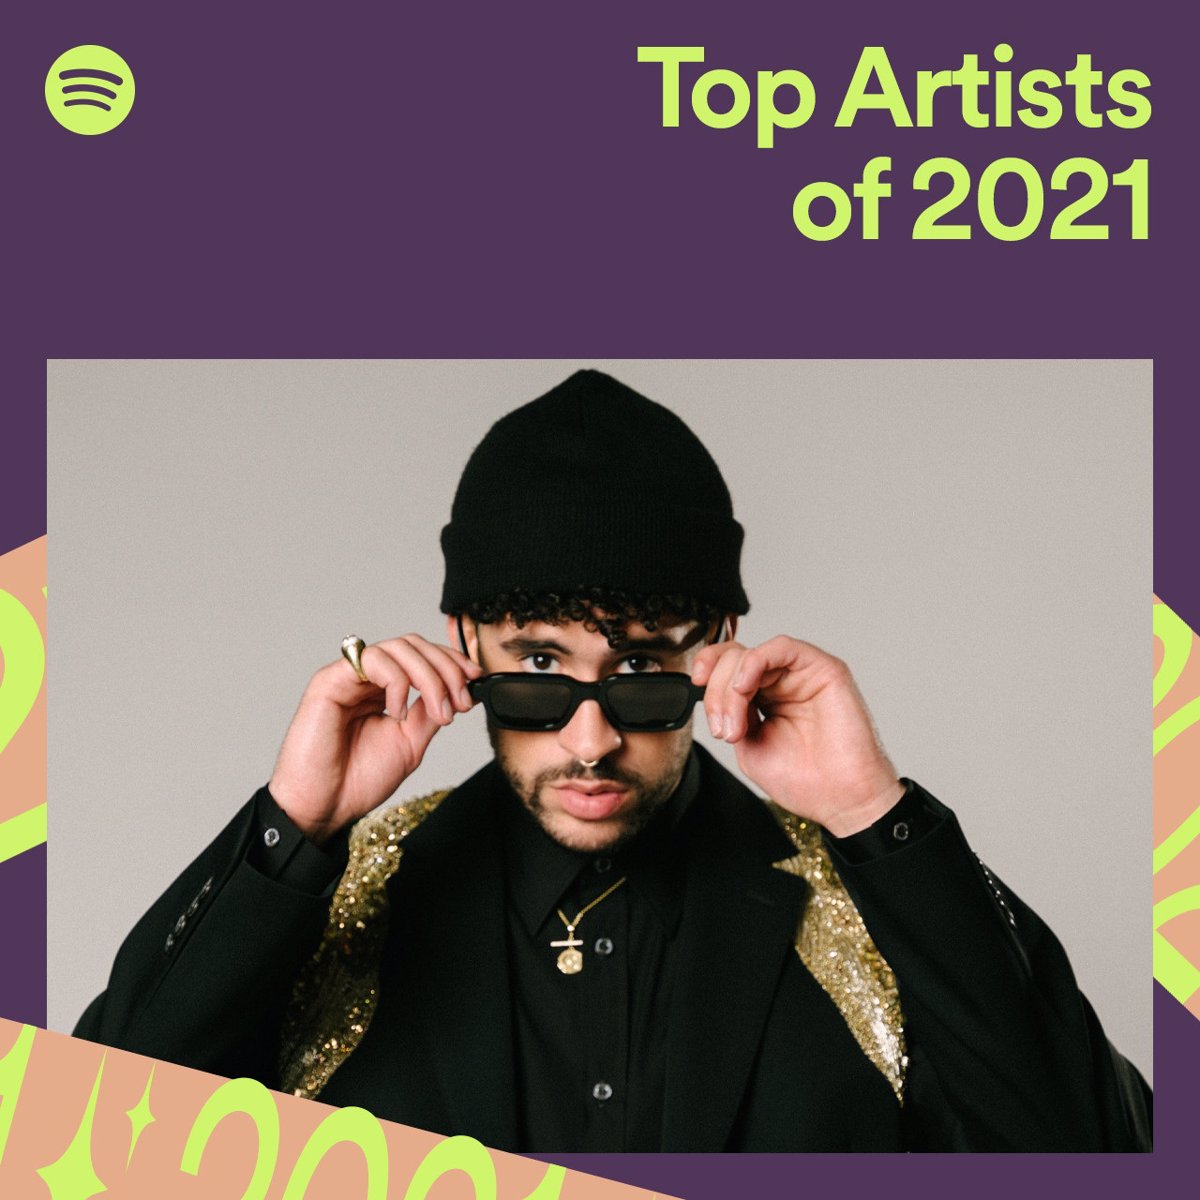 Bad Bunny repeats for the second year as the most listened to artist on Spotify worldwide